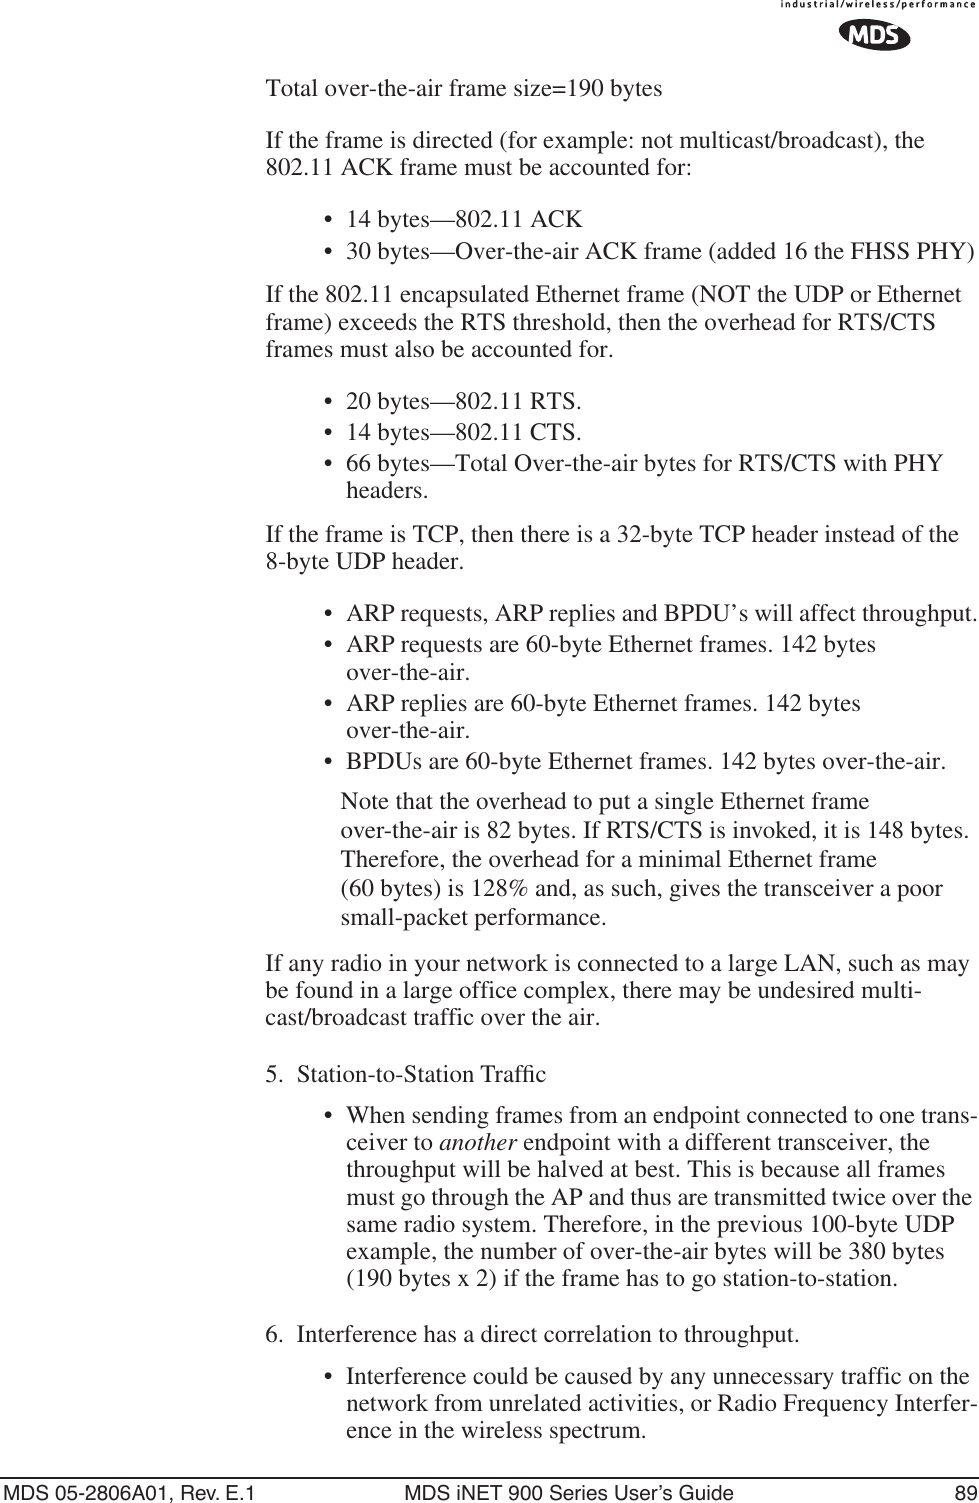 MDS 05-2806A01, Rev. E.1 MDS iNET 900 Series User’s Guide 89Total over-the-air frame size=190 bytesIf the frame is directed (for example: not multicast/broadcast), the 802.11 ACK frame must be accounted for:• 14 bytes—802.11 ACK• 30 bytes—Over-the-air ACK frame (added 16 the FHSS PHY)If the 802.11 encapsulated Ethernet frame (NOT the UDP or Ethernet frame) exceeds the RTS threshold, then the overhead for RTS/CTS frames must also be accounted for.• 20 bytes—802.11 RTS.• 14 bytes—802.11 CTS.• 66 bytes—Total Over-the-air bytes for RTS/CTS with PHY headers.If the frame is TCP, then there is a 32-byte TCP header instead of the 8-byte UDP header.•ARP requests, ARP replies and BPDU’s will affect throughput.• ARP requests are 60-byte Ethernet frames. 142 bytes over-the-air.• ARP replies are 60-byte Ethernet frames. 142 bytes over-the-air.• BPDUs are 60-byte Ethernet frames. 142 bytes over-the-air.Note that the overhead to put a single Ethernet frame over-the-air is 82 bytes. If RTS/CTS is invoked, it is 148 bytes. Therefore, the overhead for a minimal Ethernet frame (60 bytes) is 128% and, as such, gives the transceiver a poor small-packet performance.If any radio in your network is connected to a large LAN, such as may be found in a large office complex, there may be undesired multi-cast/broadcast traffic over the air.5. Station-to-Station Trafﬁc•When sending frames from an endpoint connected to one trans-ceiver to another endpoint with a different transceiver, the throughput will be halved at best. This is because all frames must go through the AP and thus are transmitted twice over the same radio system. Therefore, in the previous 100-byte UDP example, the number of over-the-air bytes will be 380 bytes (190 bytes x 2) if the frame has to go station-to-station.6. Interference has a direct correlation to throughput.• Interference could be caused by any unnecessary traffic on the network from unrelated activities, or Radio Frequency Interfer-ence in the wireless spectrum.